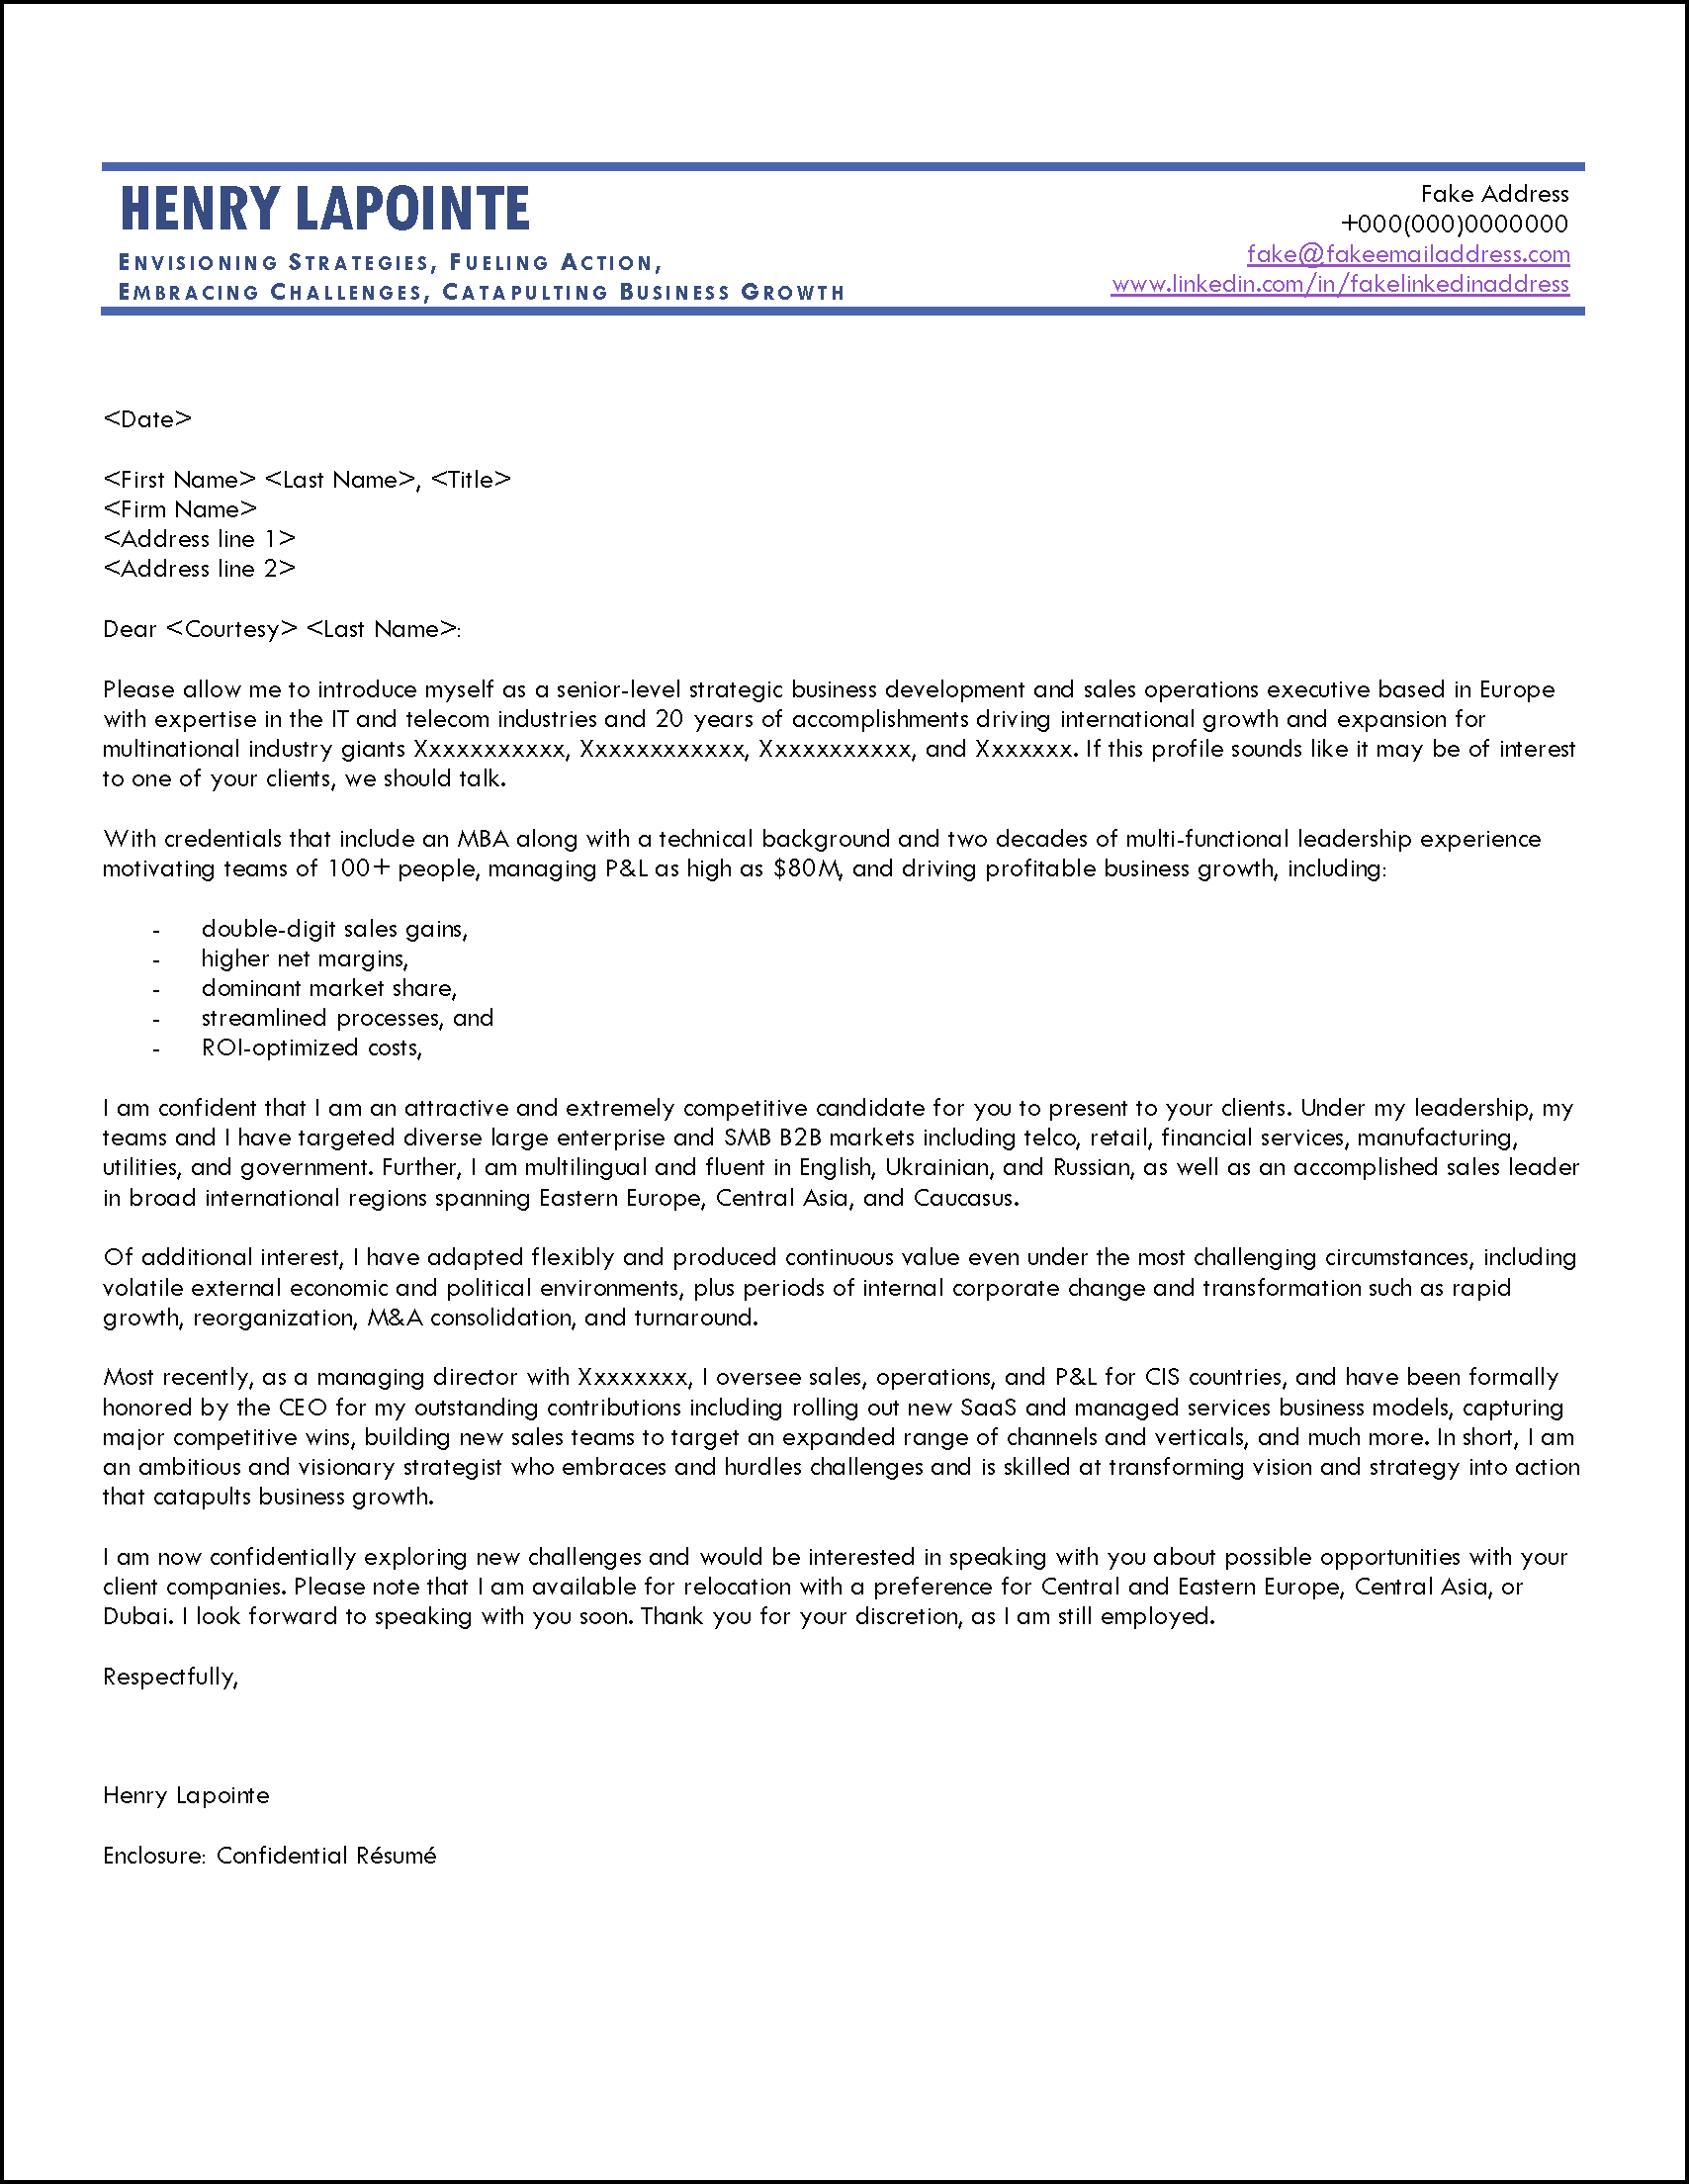 Example of a Job Recruiter Introduction Letter